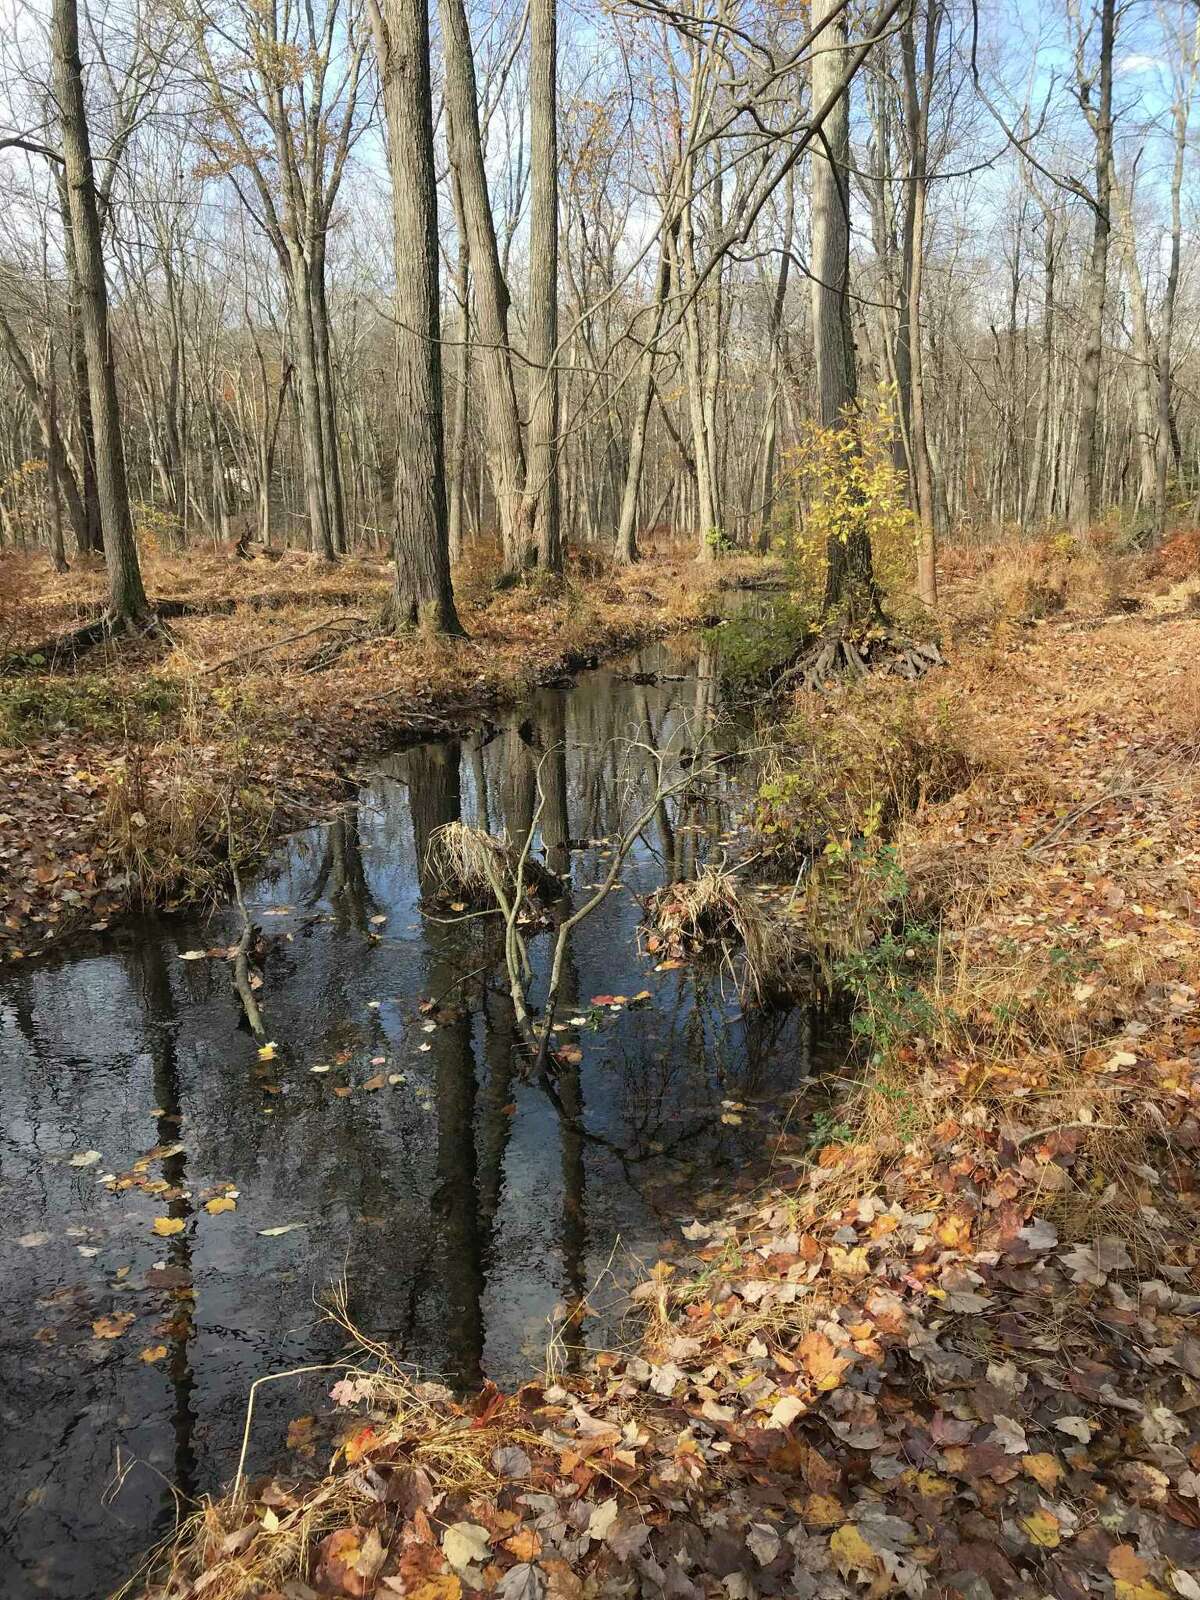 The Stamford Land Conservation Trust announced Tuesday a new watershed nature preserved in North Stamford located within the Mianus River watershed. Land Trust President Harry Day called a “win-win” situation that helps underscore the role wetlands play in protecting fish and wildlife.